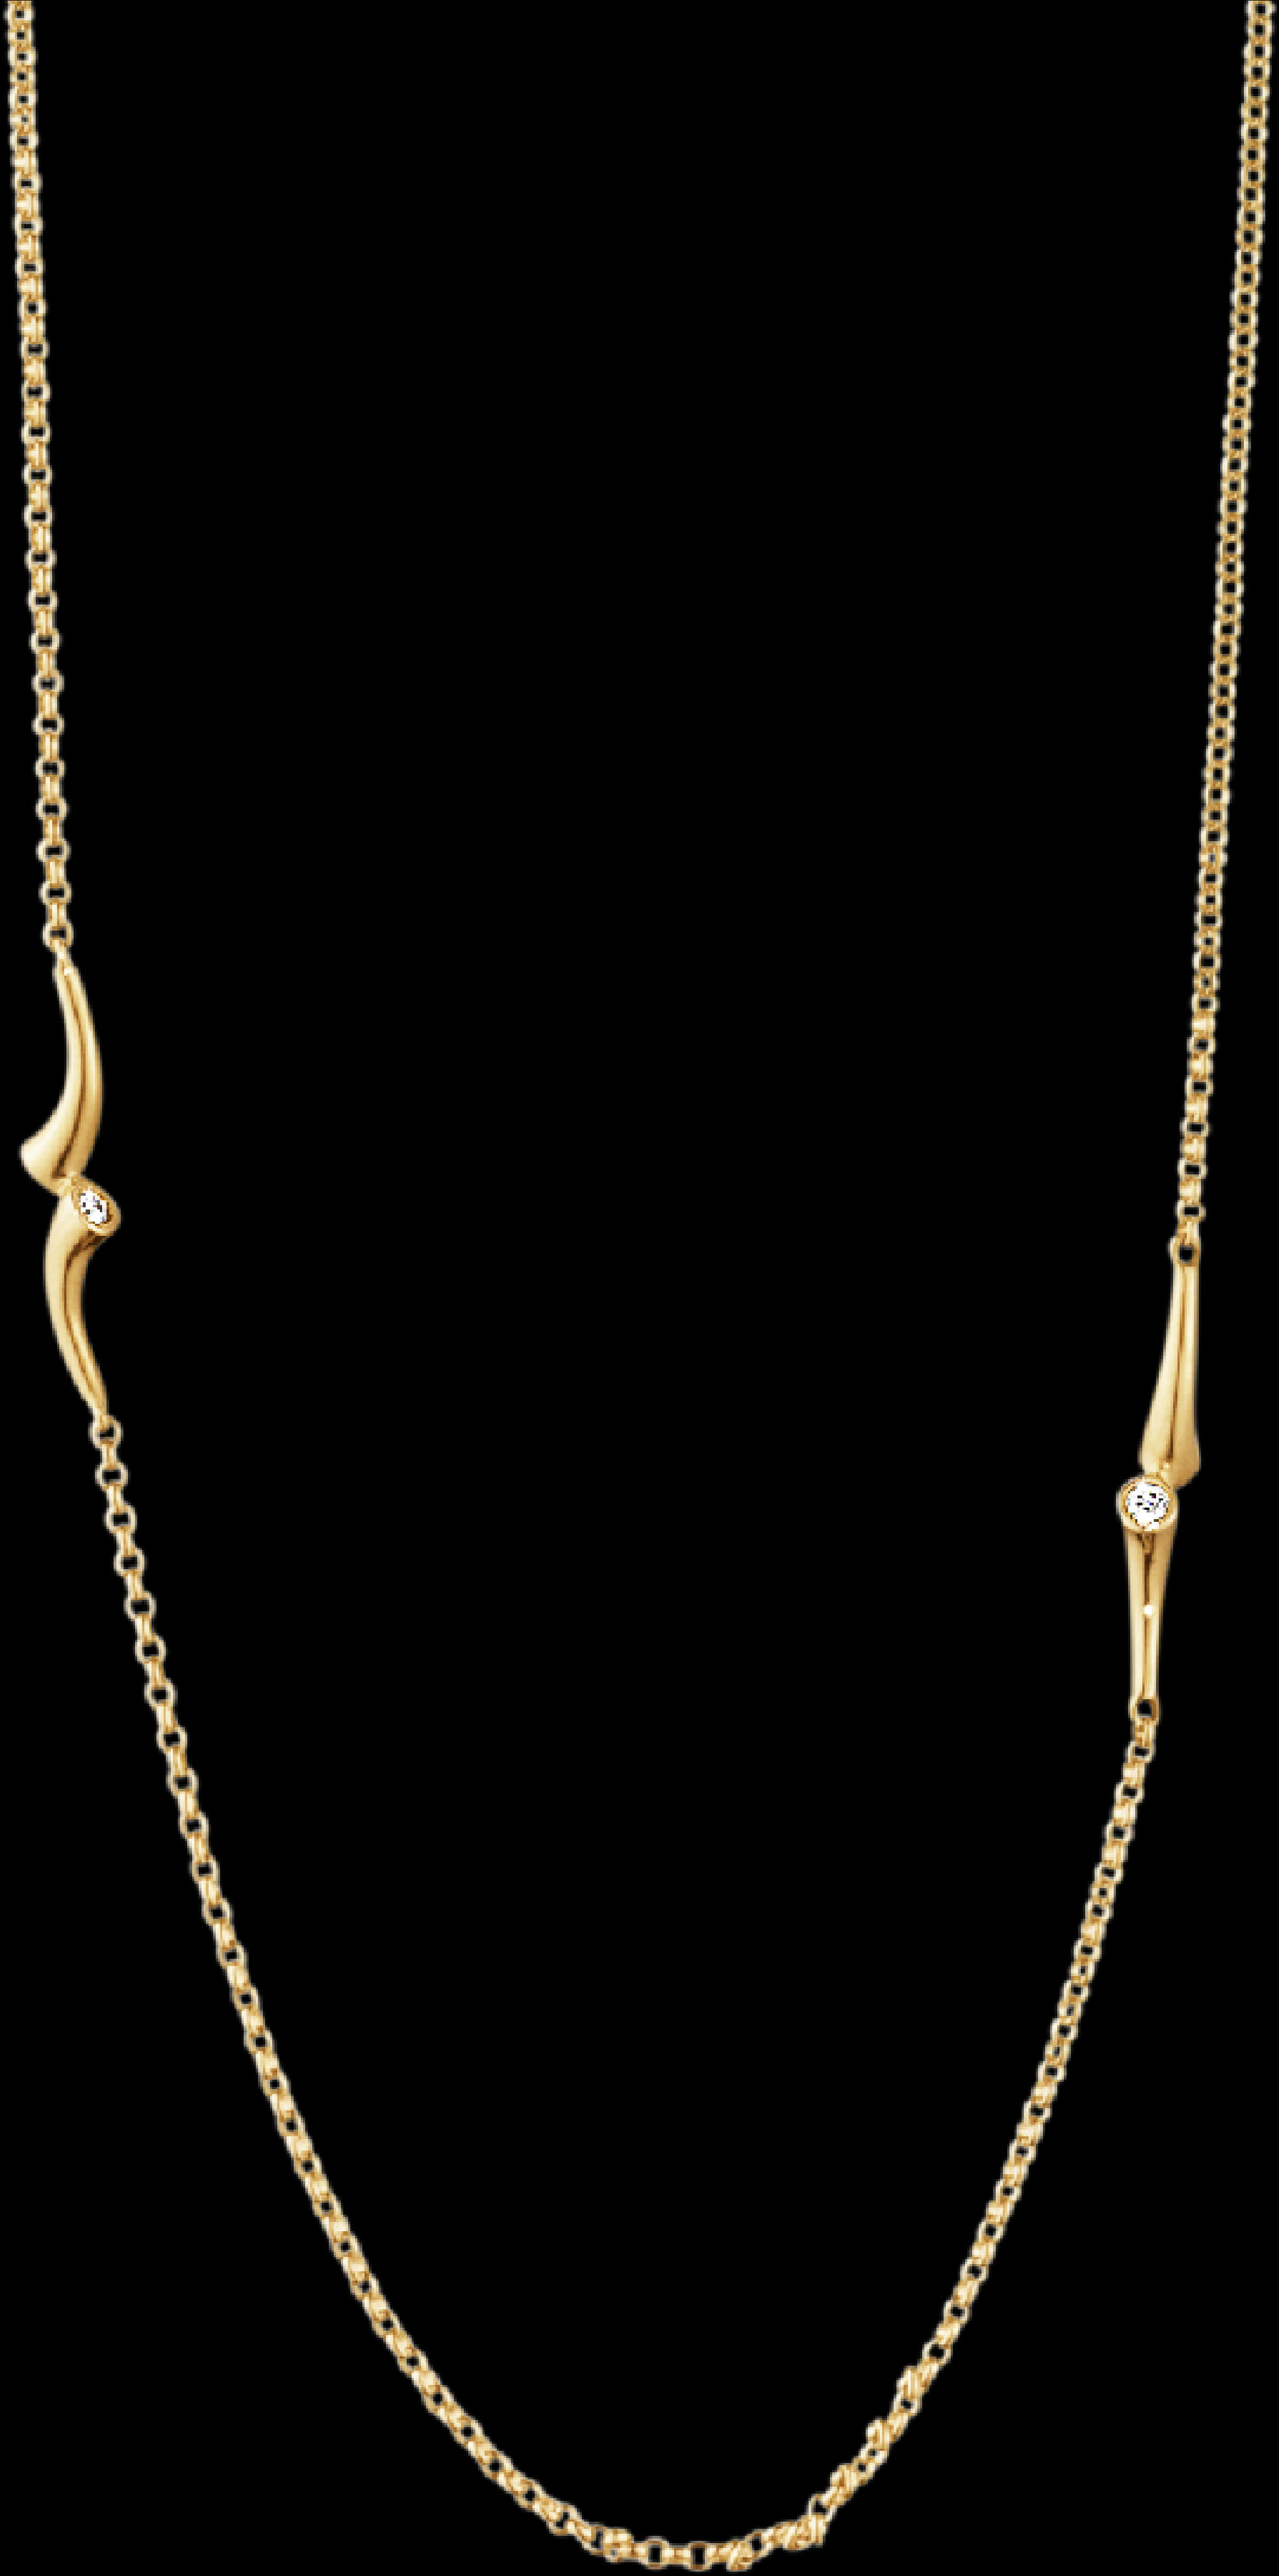 Elegant Gold Chainwith Diamond Accents.jpg PNG